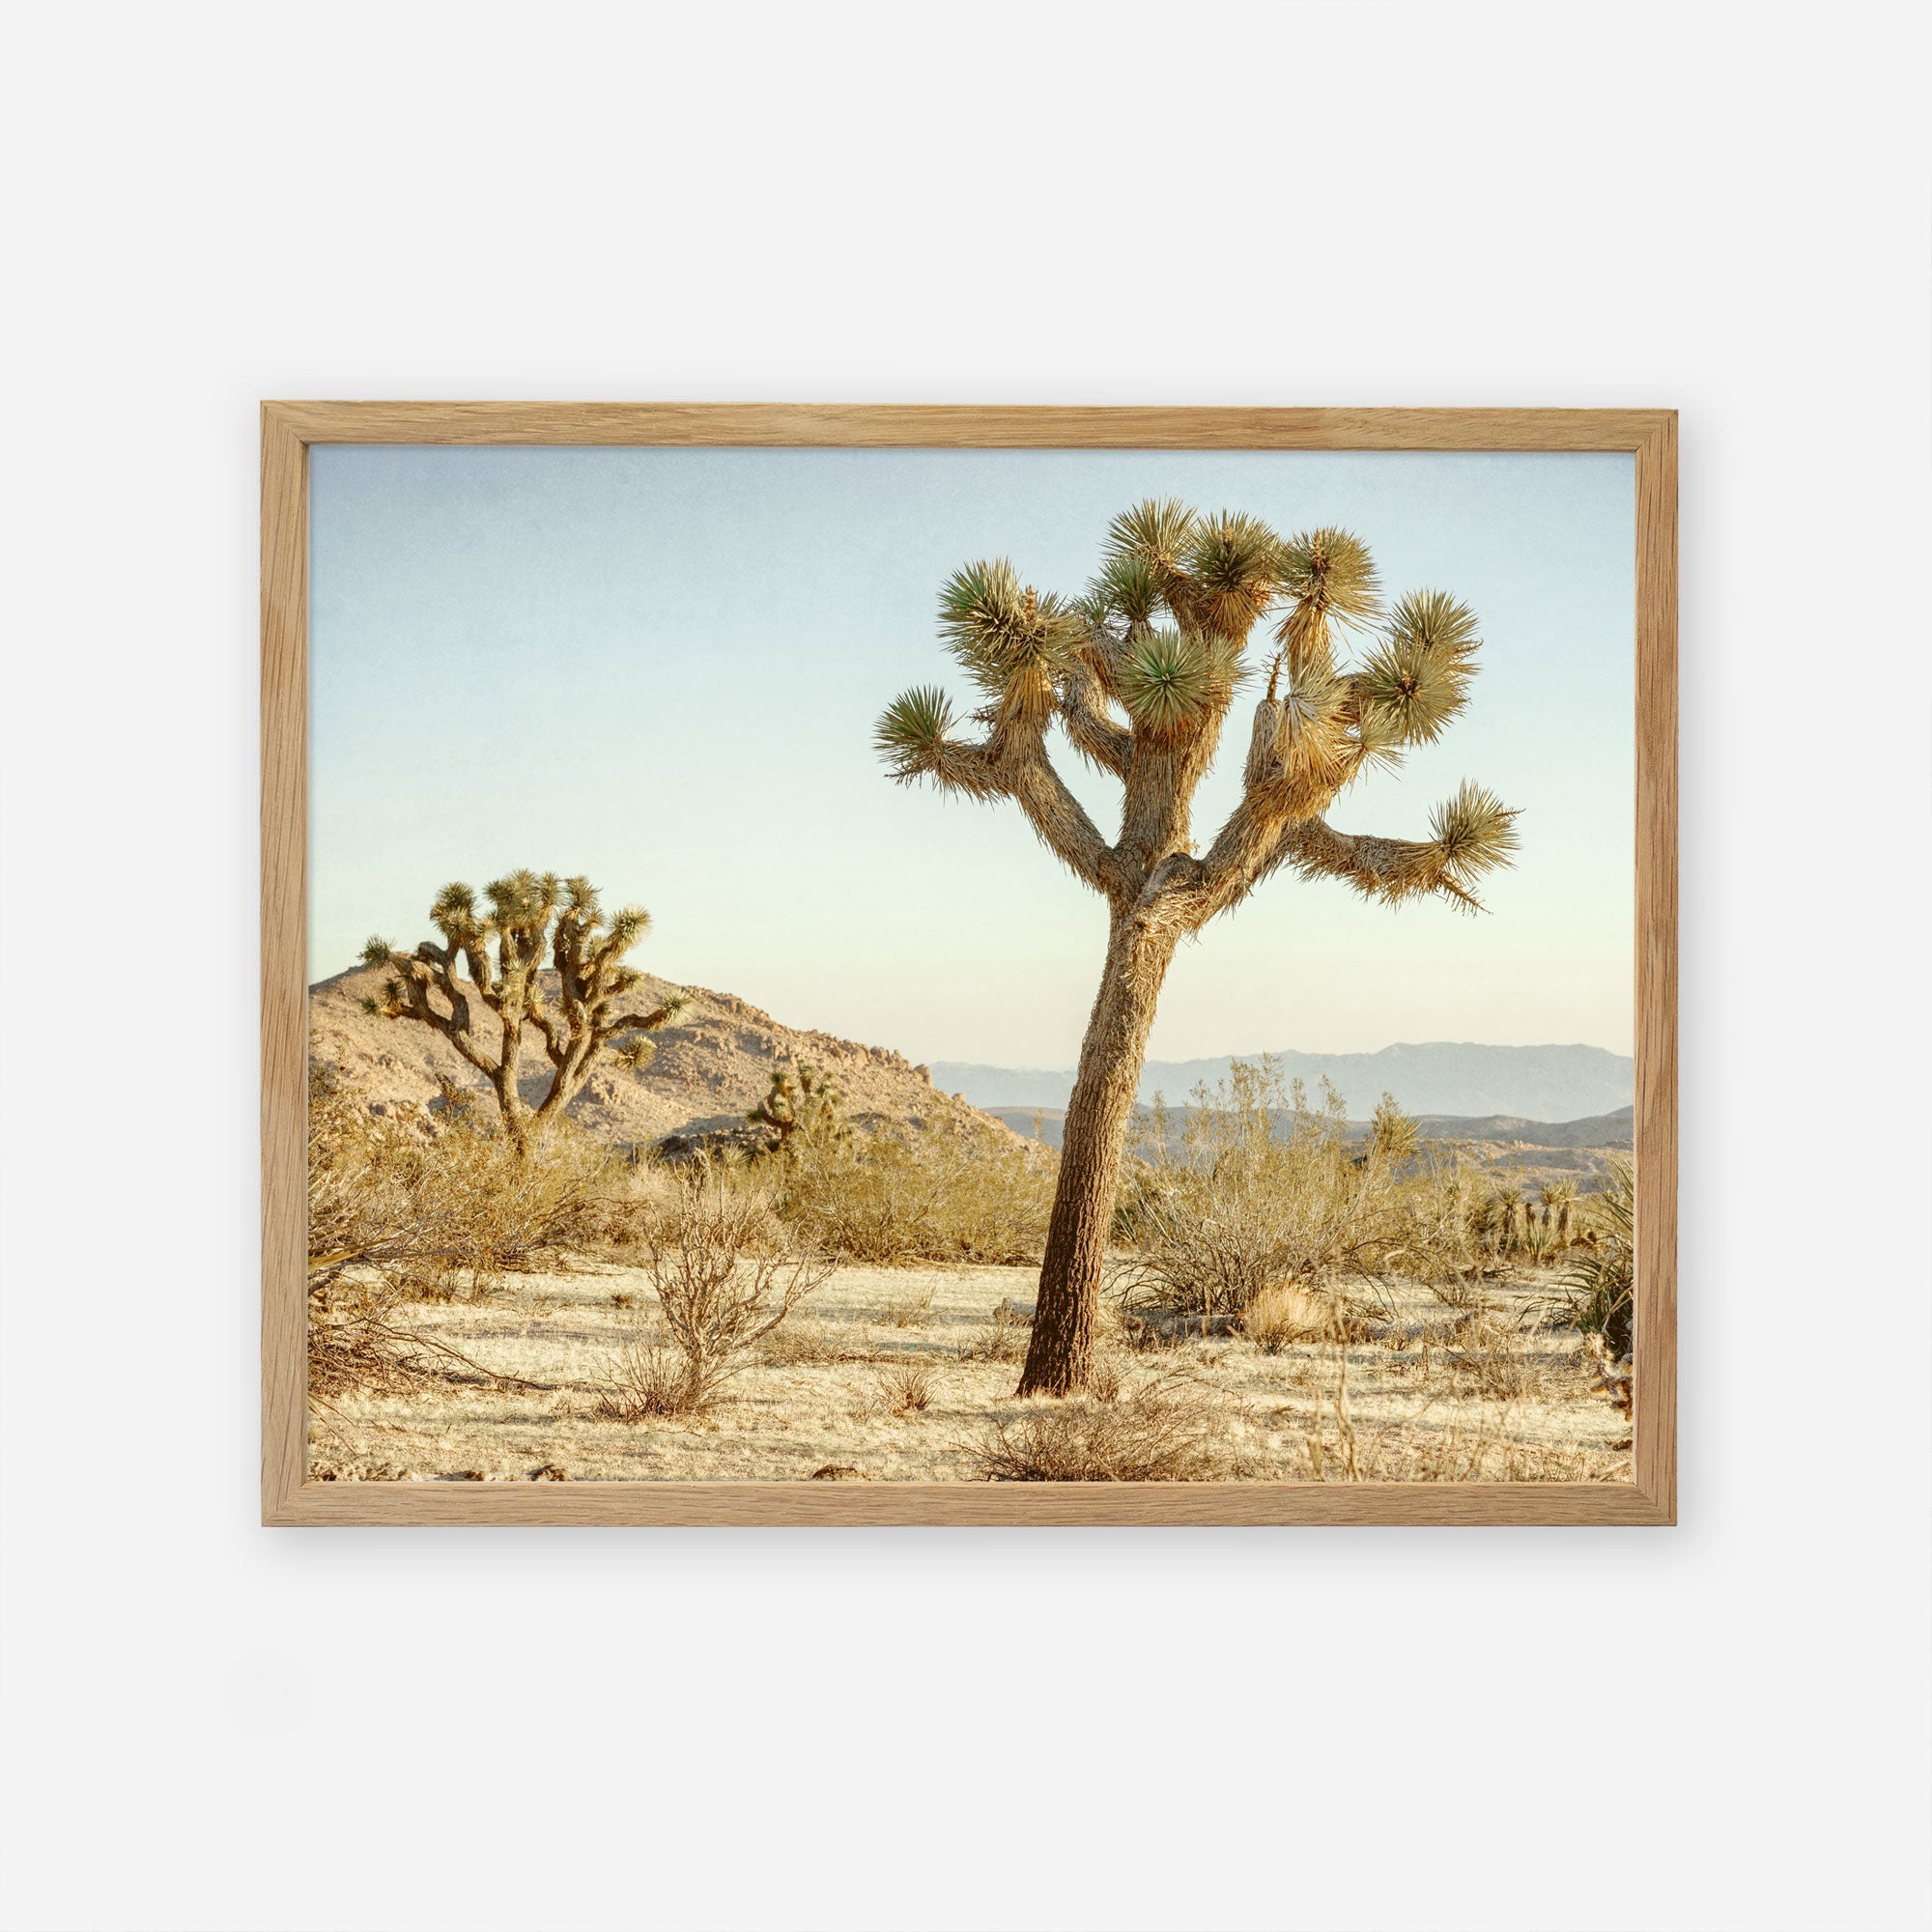 An unframed Mighty Joshua print depicting a sunlit scene in Joshua Tree National Park with several joshua trees, dry grass, and distant hills under a clear sky by Offley Green.